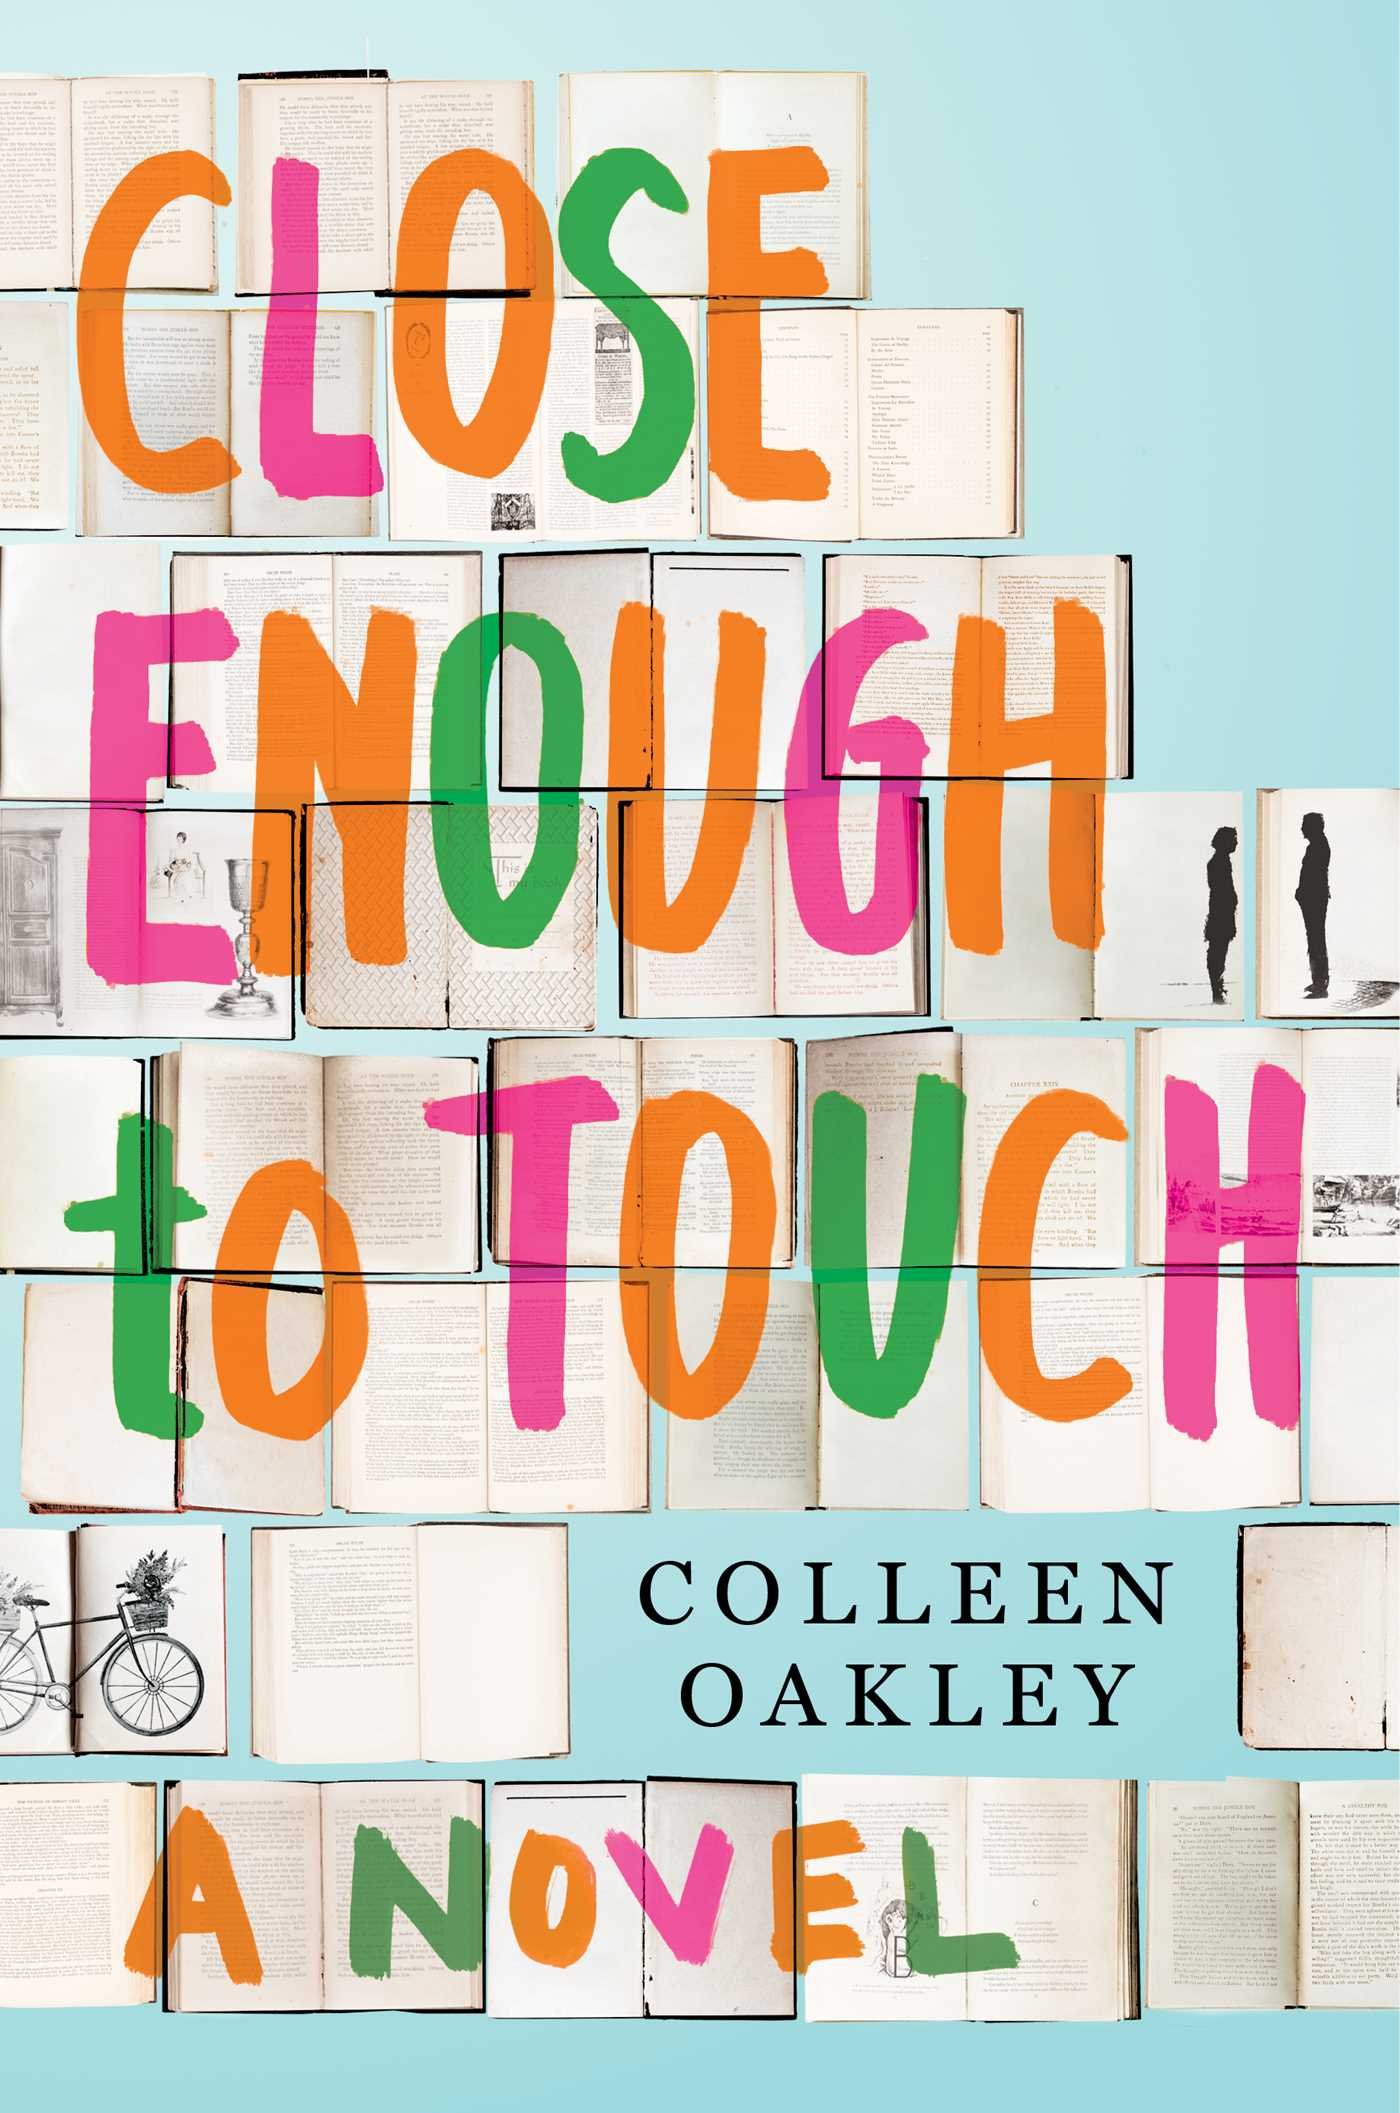 Book cover for Close Enough To Touch by Colleen Oakley.